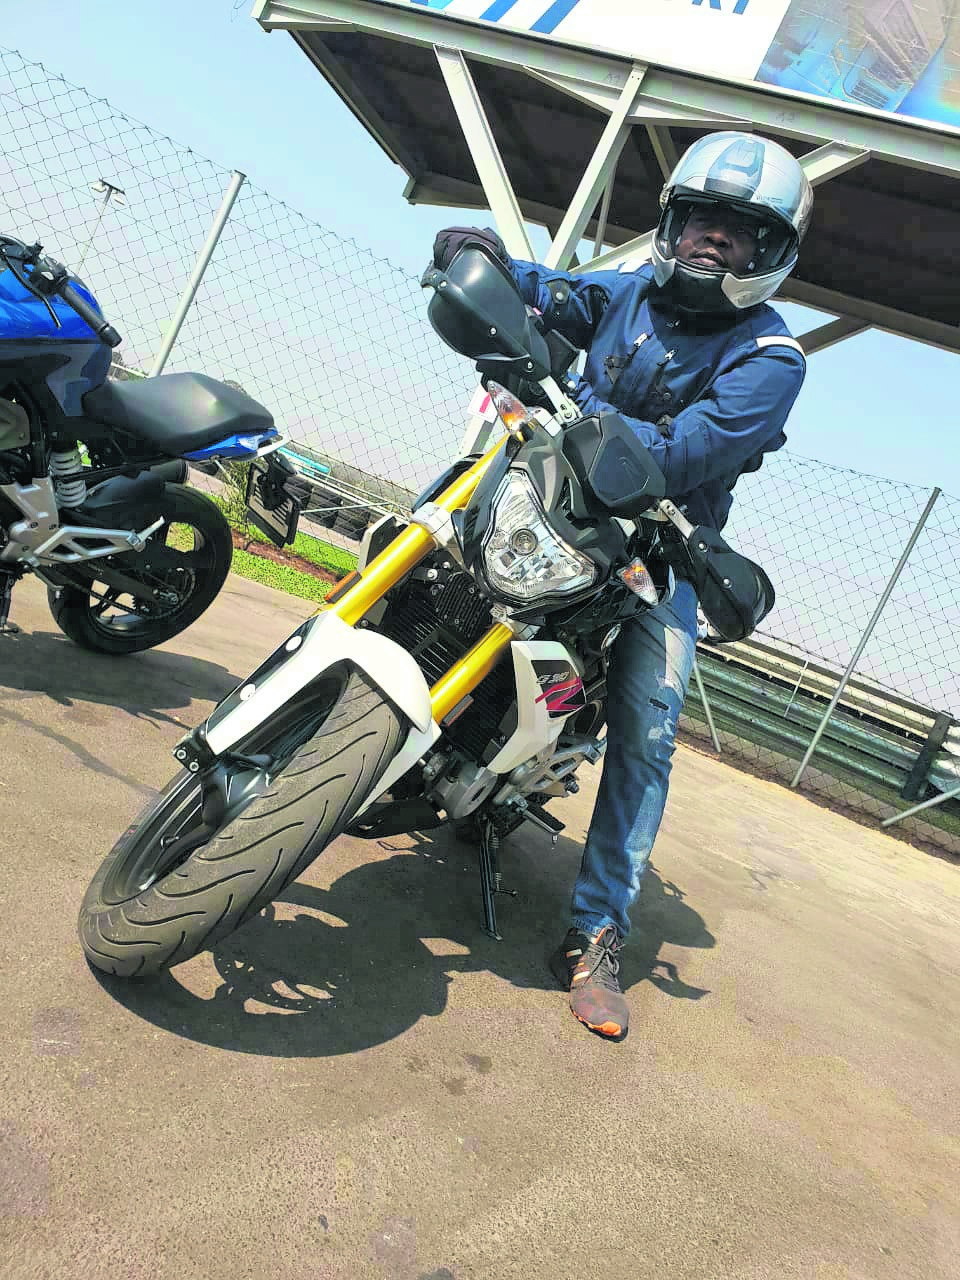 The BMW Riding Academy teaches students and some of the SunWheels team how to ride motorcycles.          Photos by Thabo Monama